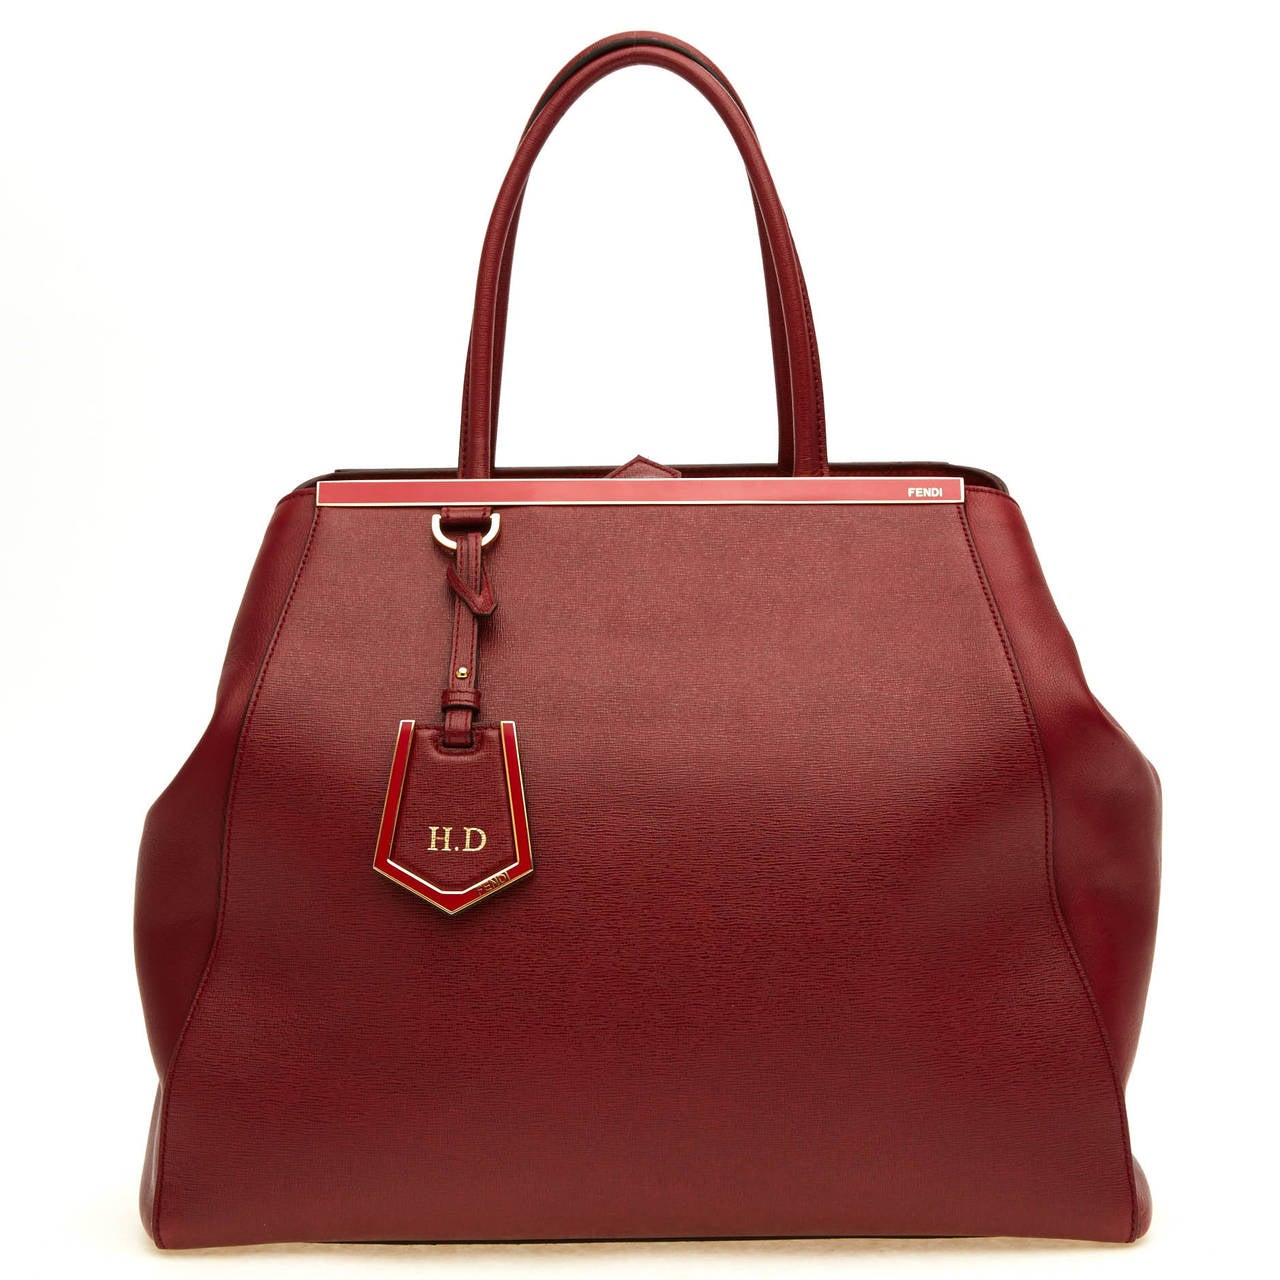 This refined Fendi Leather 2Jours in Large is featured in a soft brick red hue, and is perfect for the fall and winter. It is accented with a shining top bar that dons the Fendi brand name. It is also equipped with protective metal feet. This item